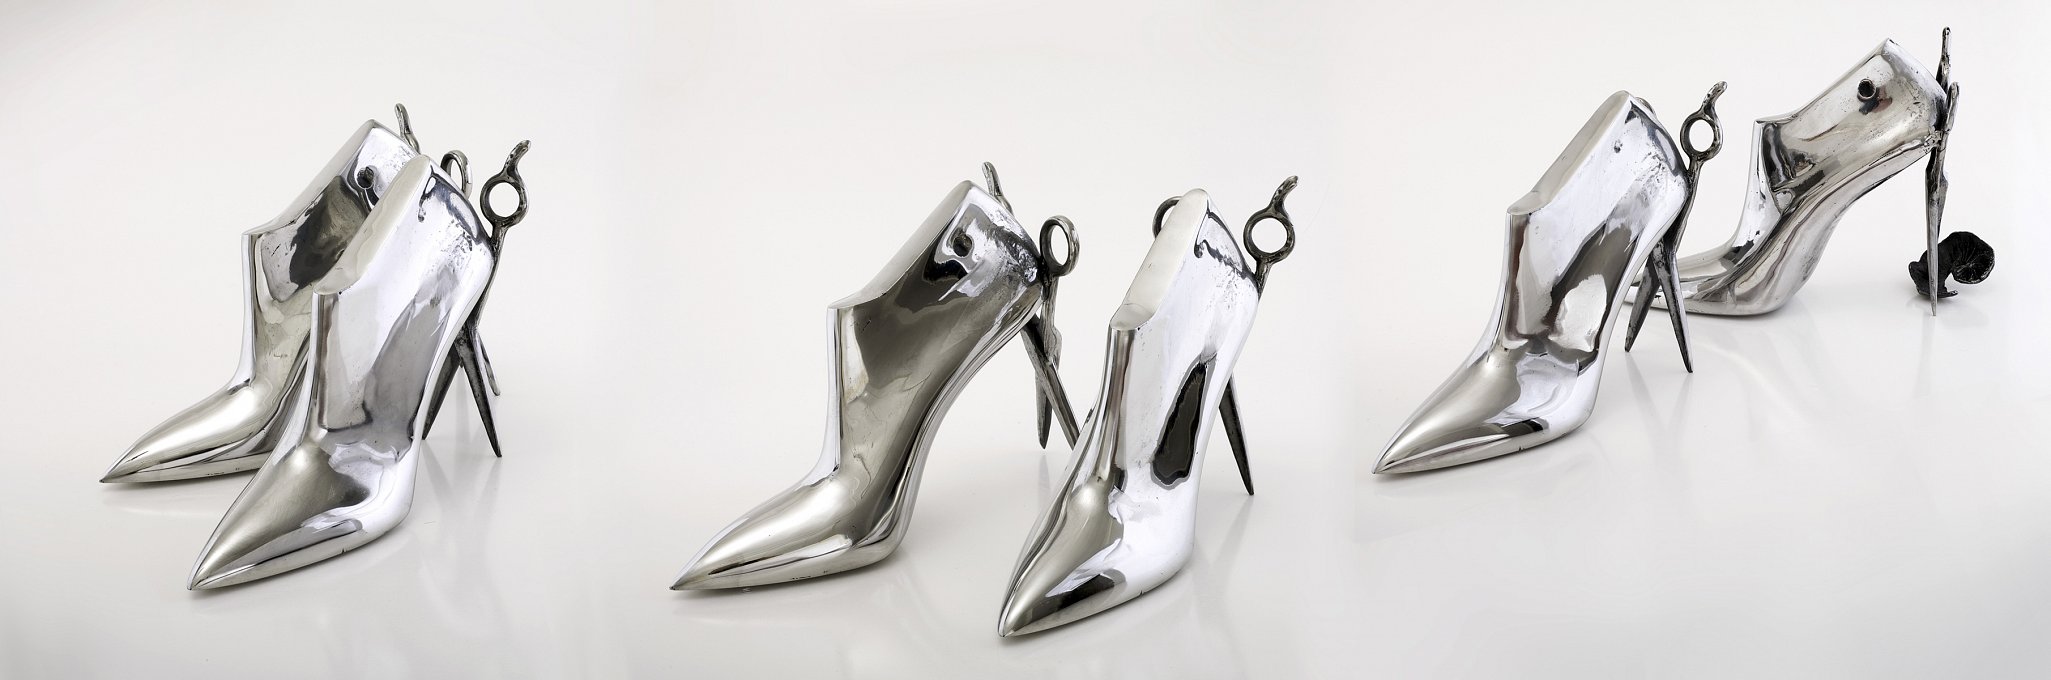 Catwalk,Three pairs of cast stainless steel shoes with scissor heels